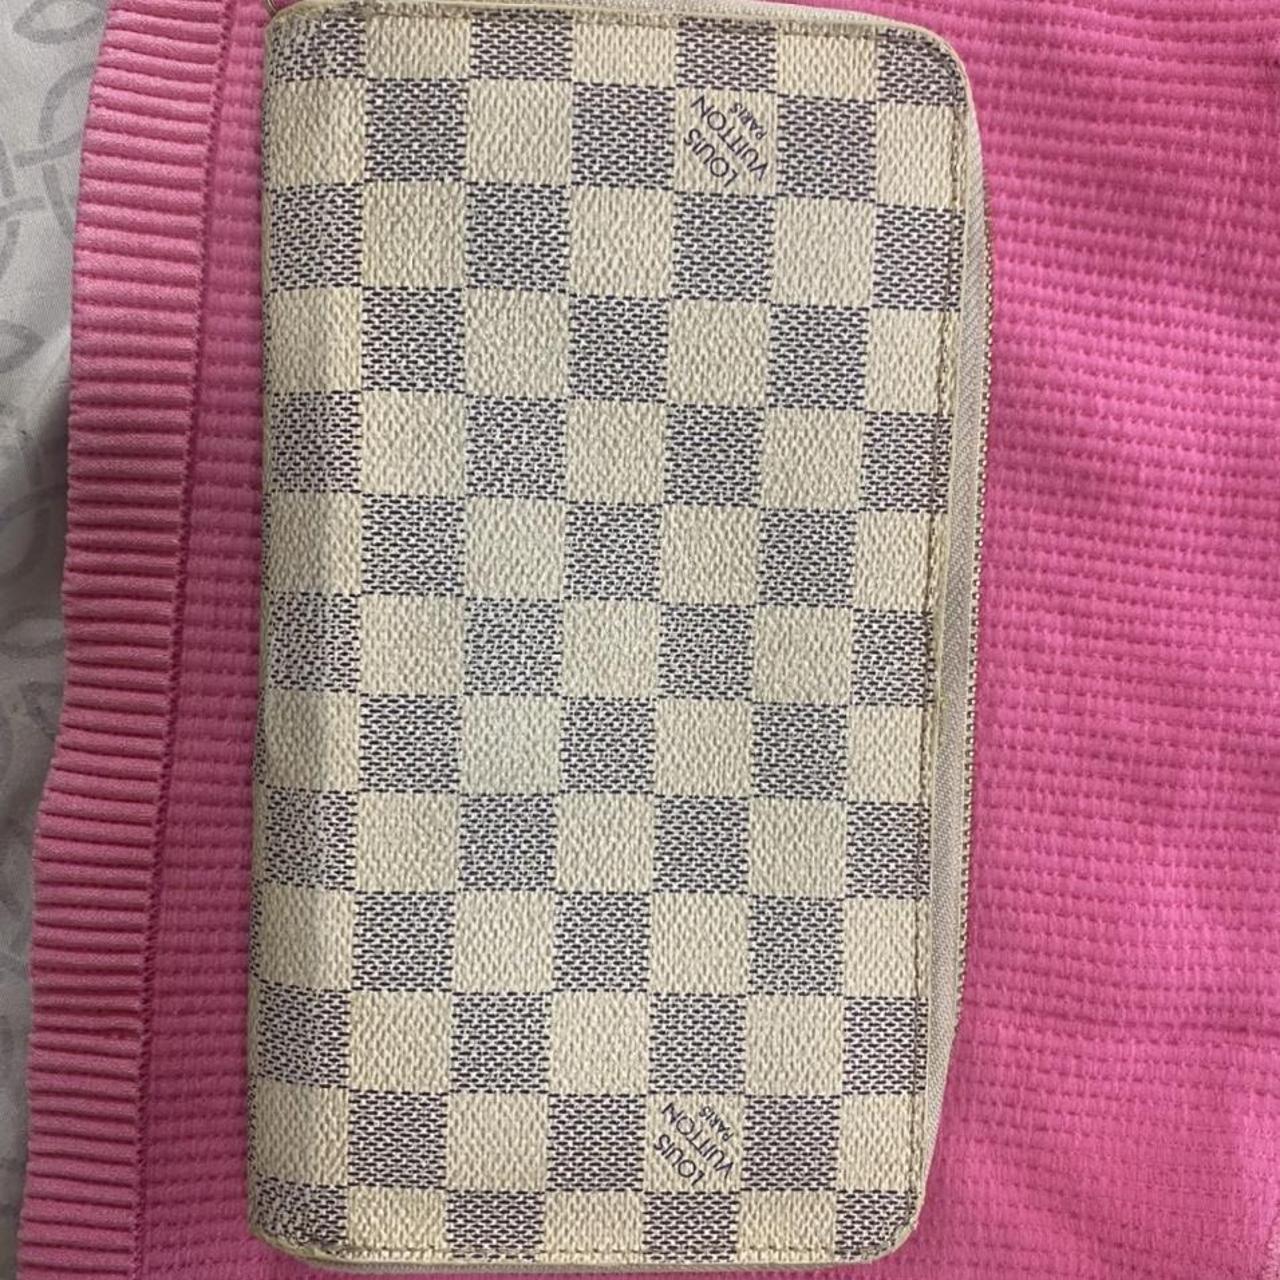 lv wallet authenticity check